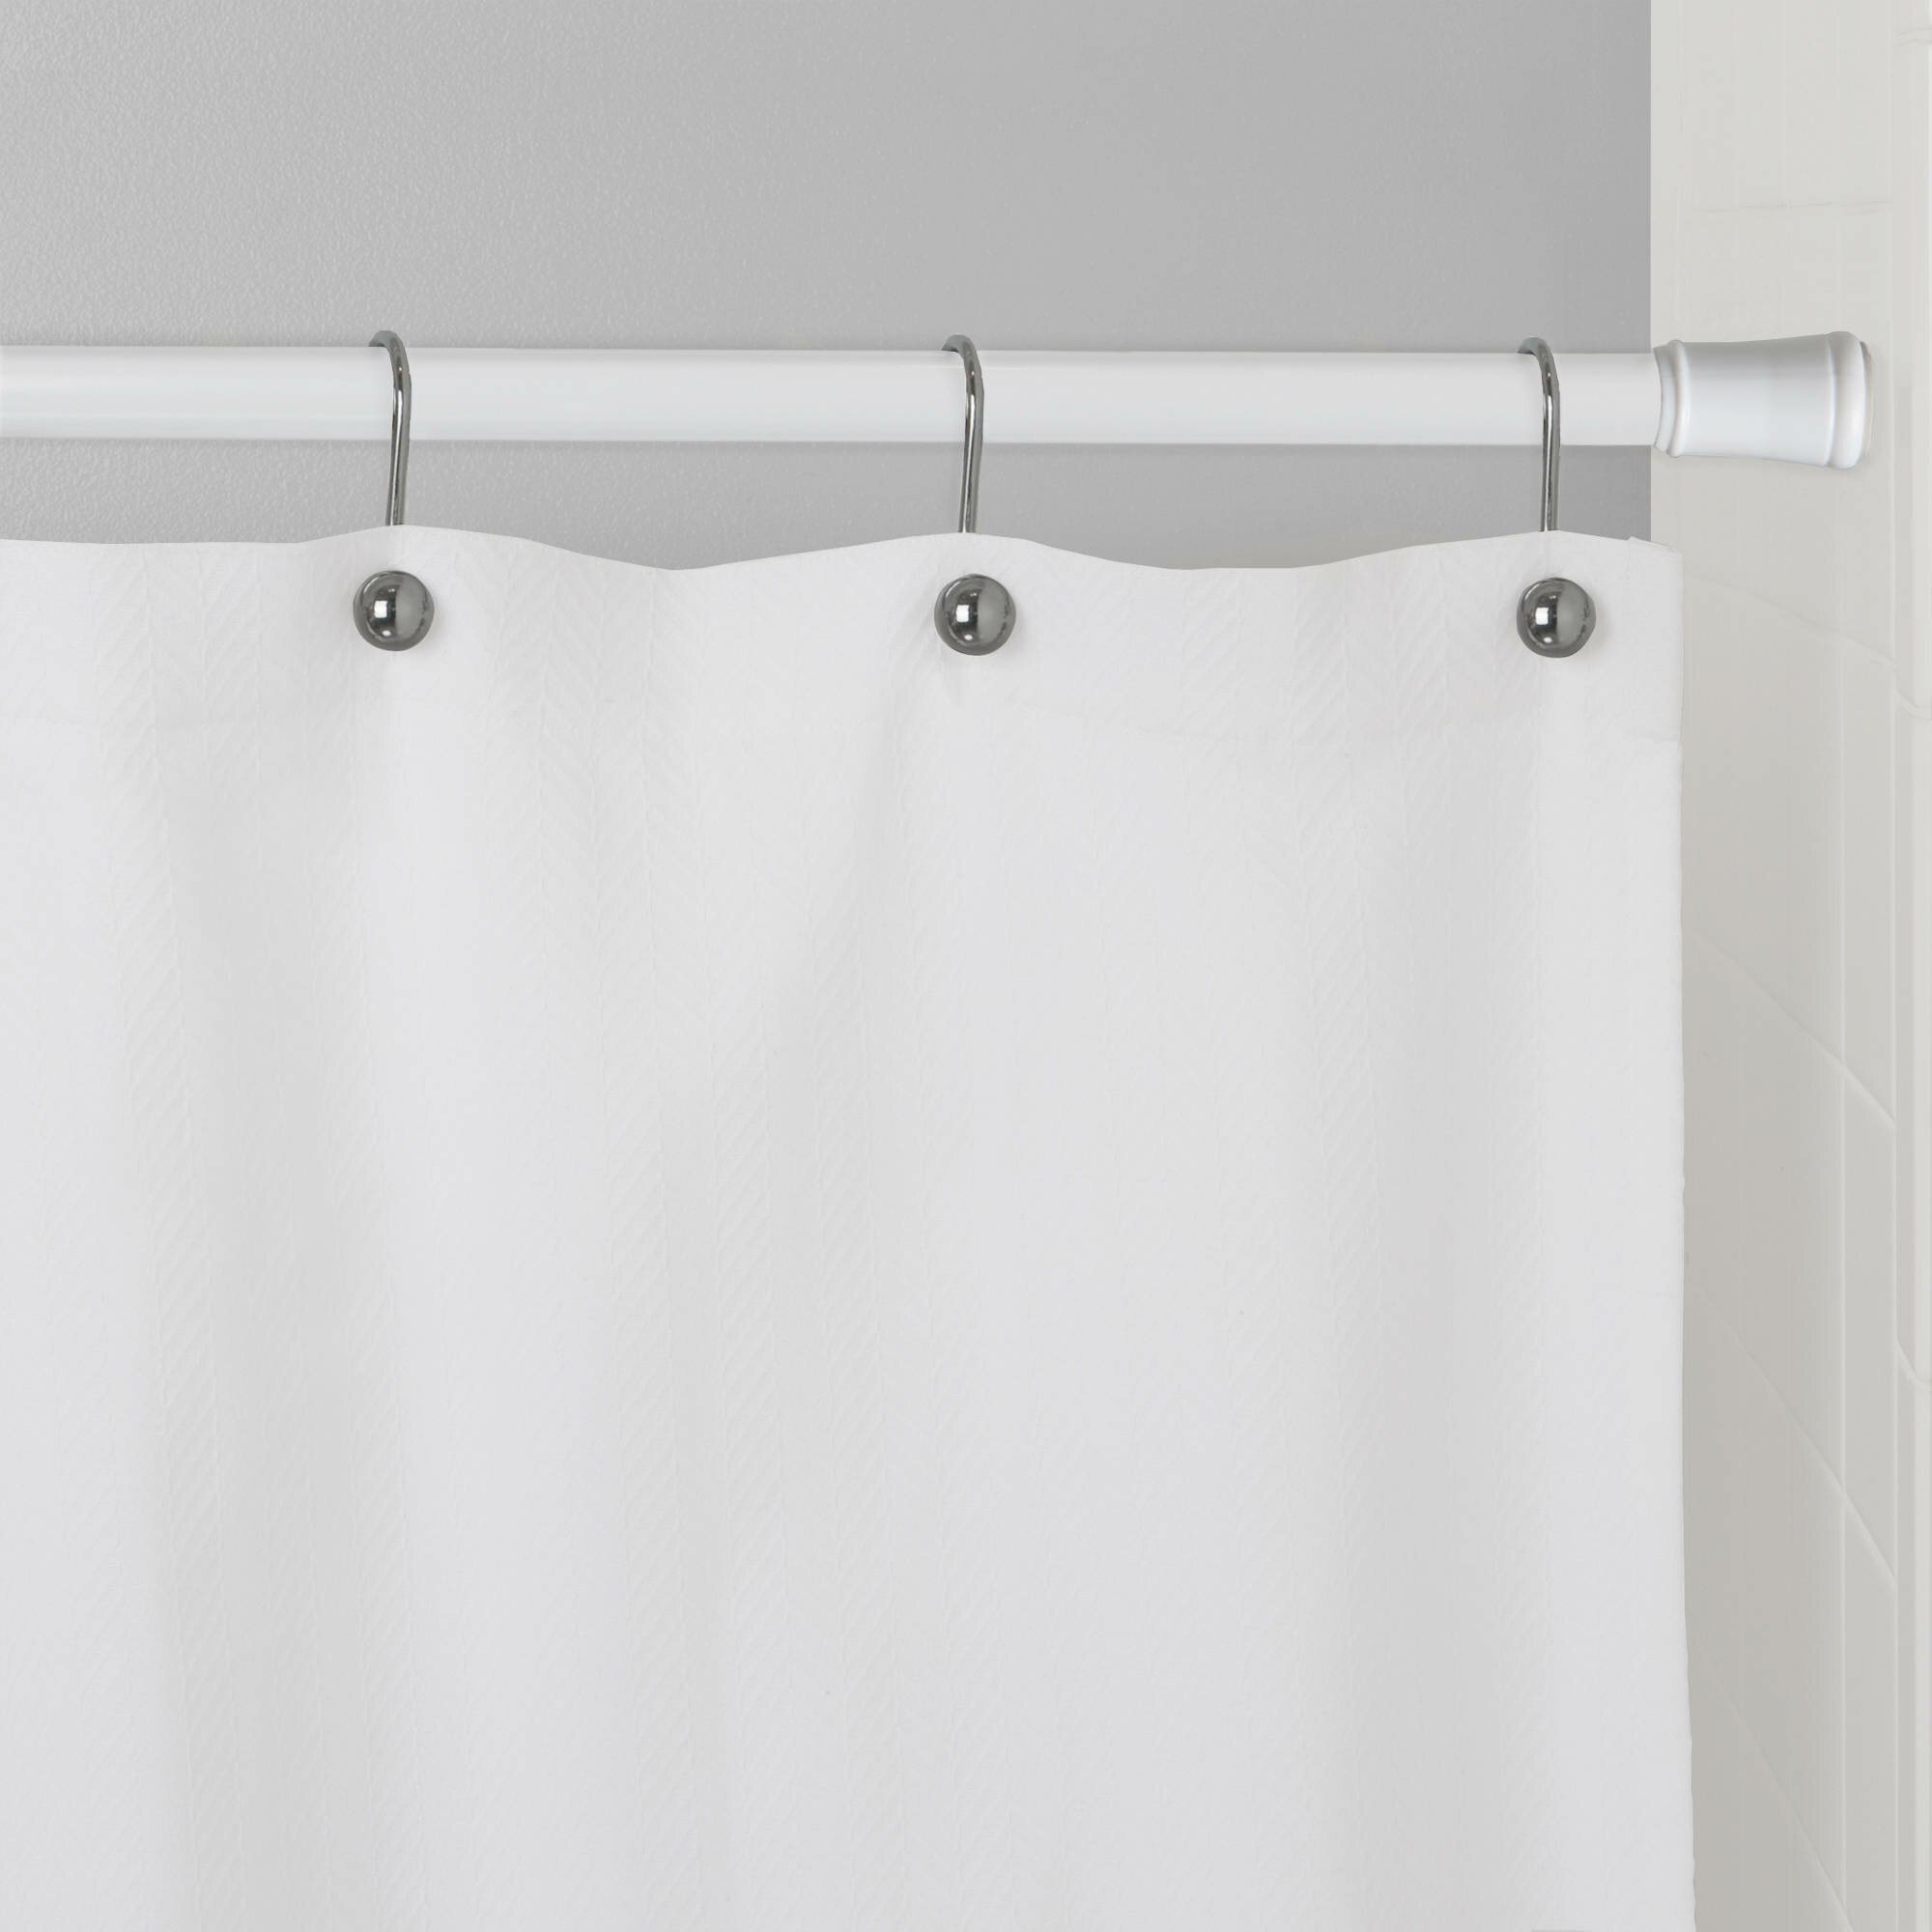 Tension Curved Shower Curtain Rod | Permanent Shower Curtain Rod | Shower Curtain Tension Rod